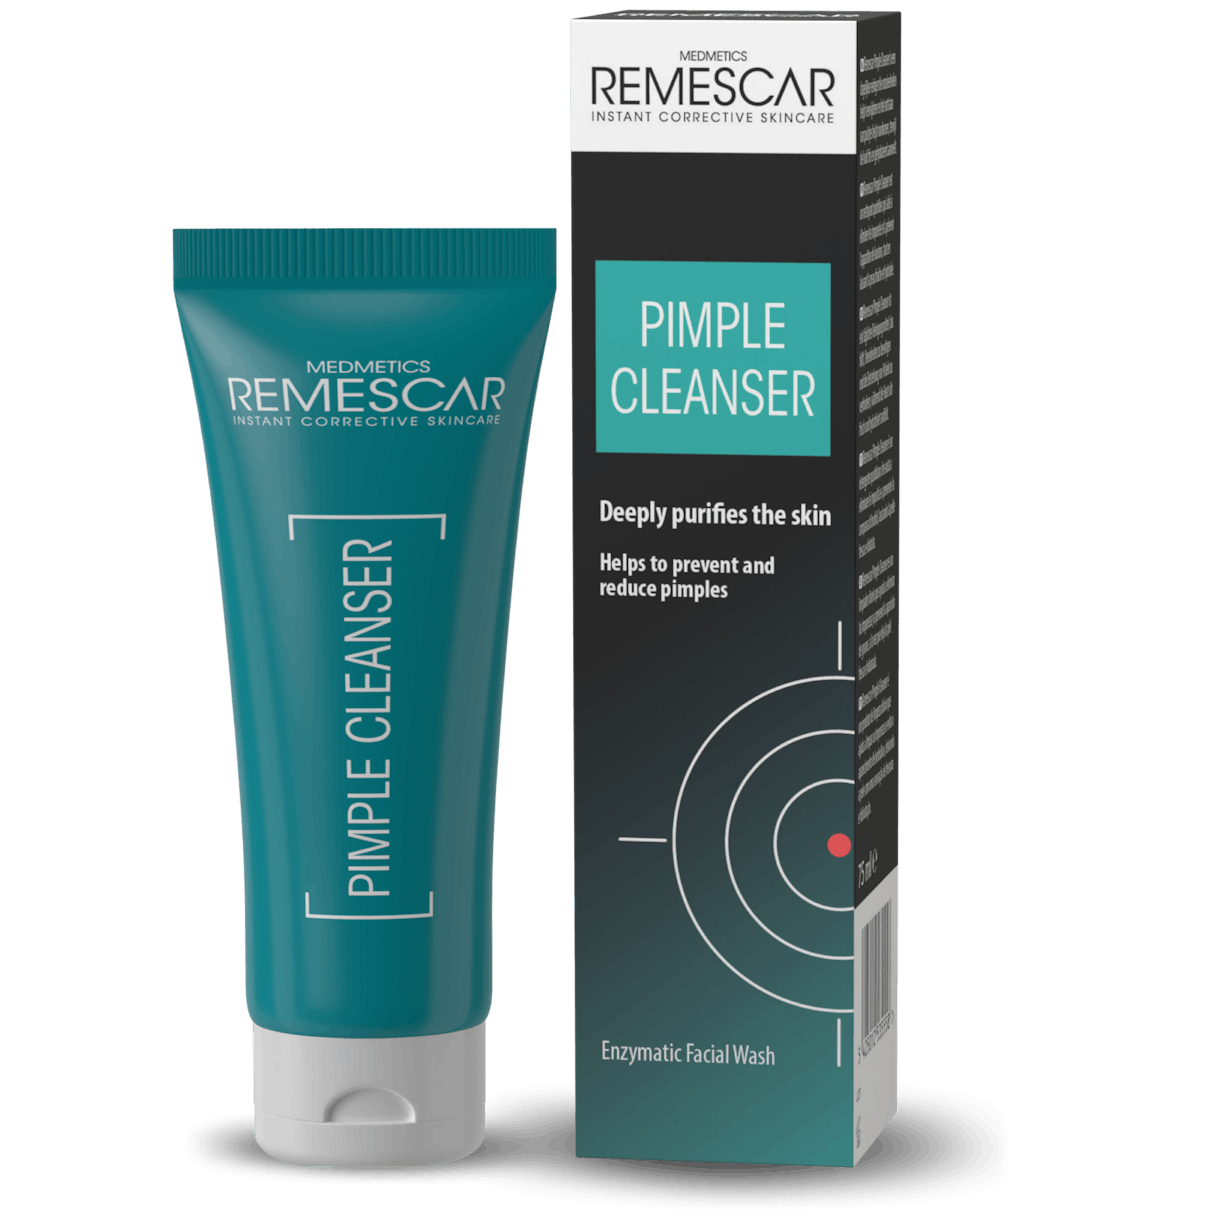 Remescar pdp pictures website and amazon 2000x2000px pimple cleanser